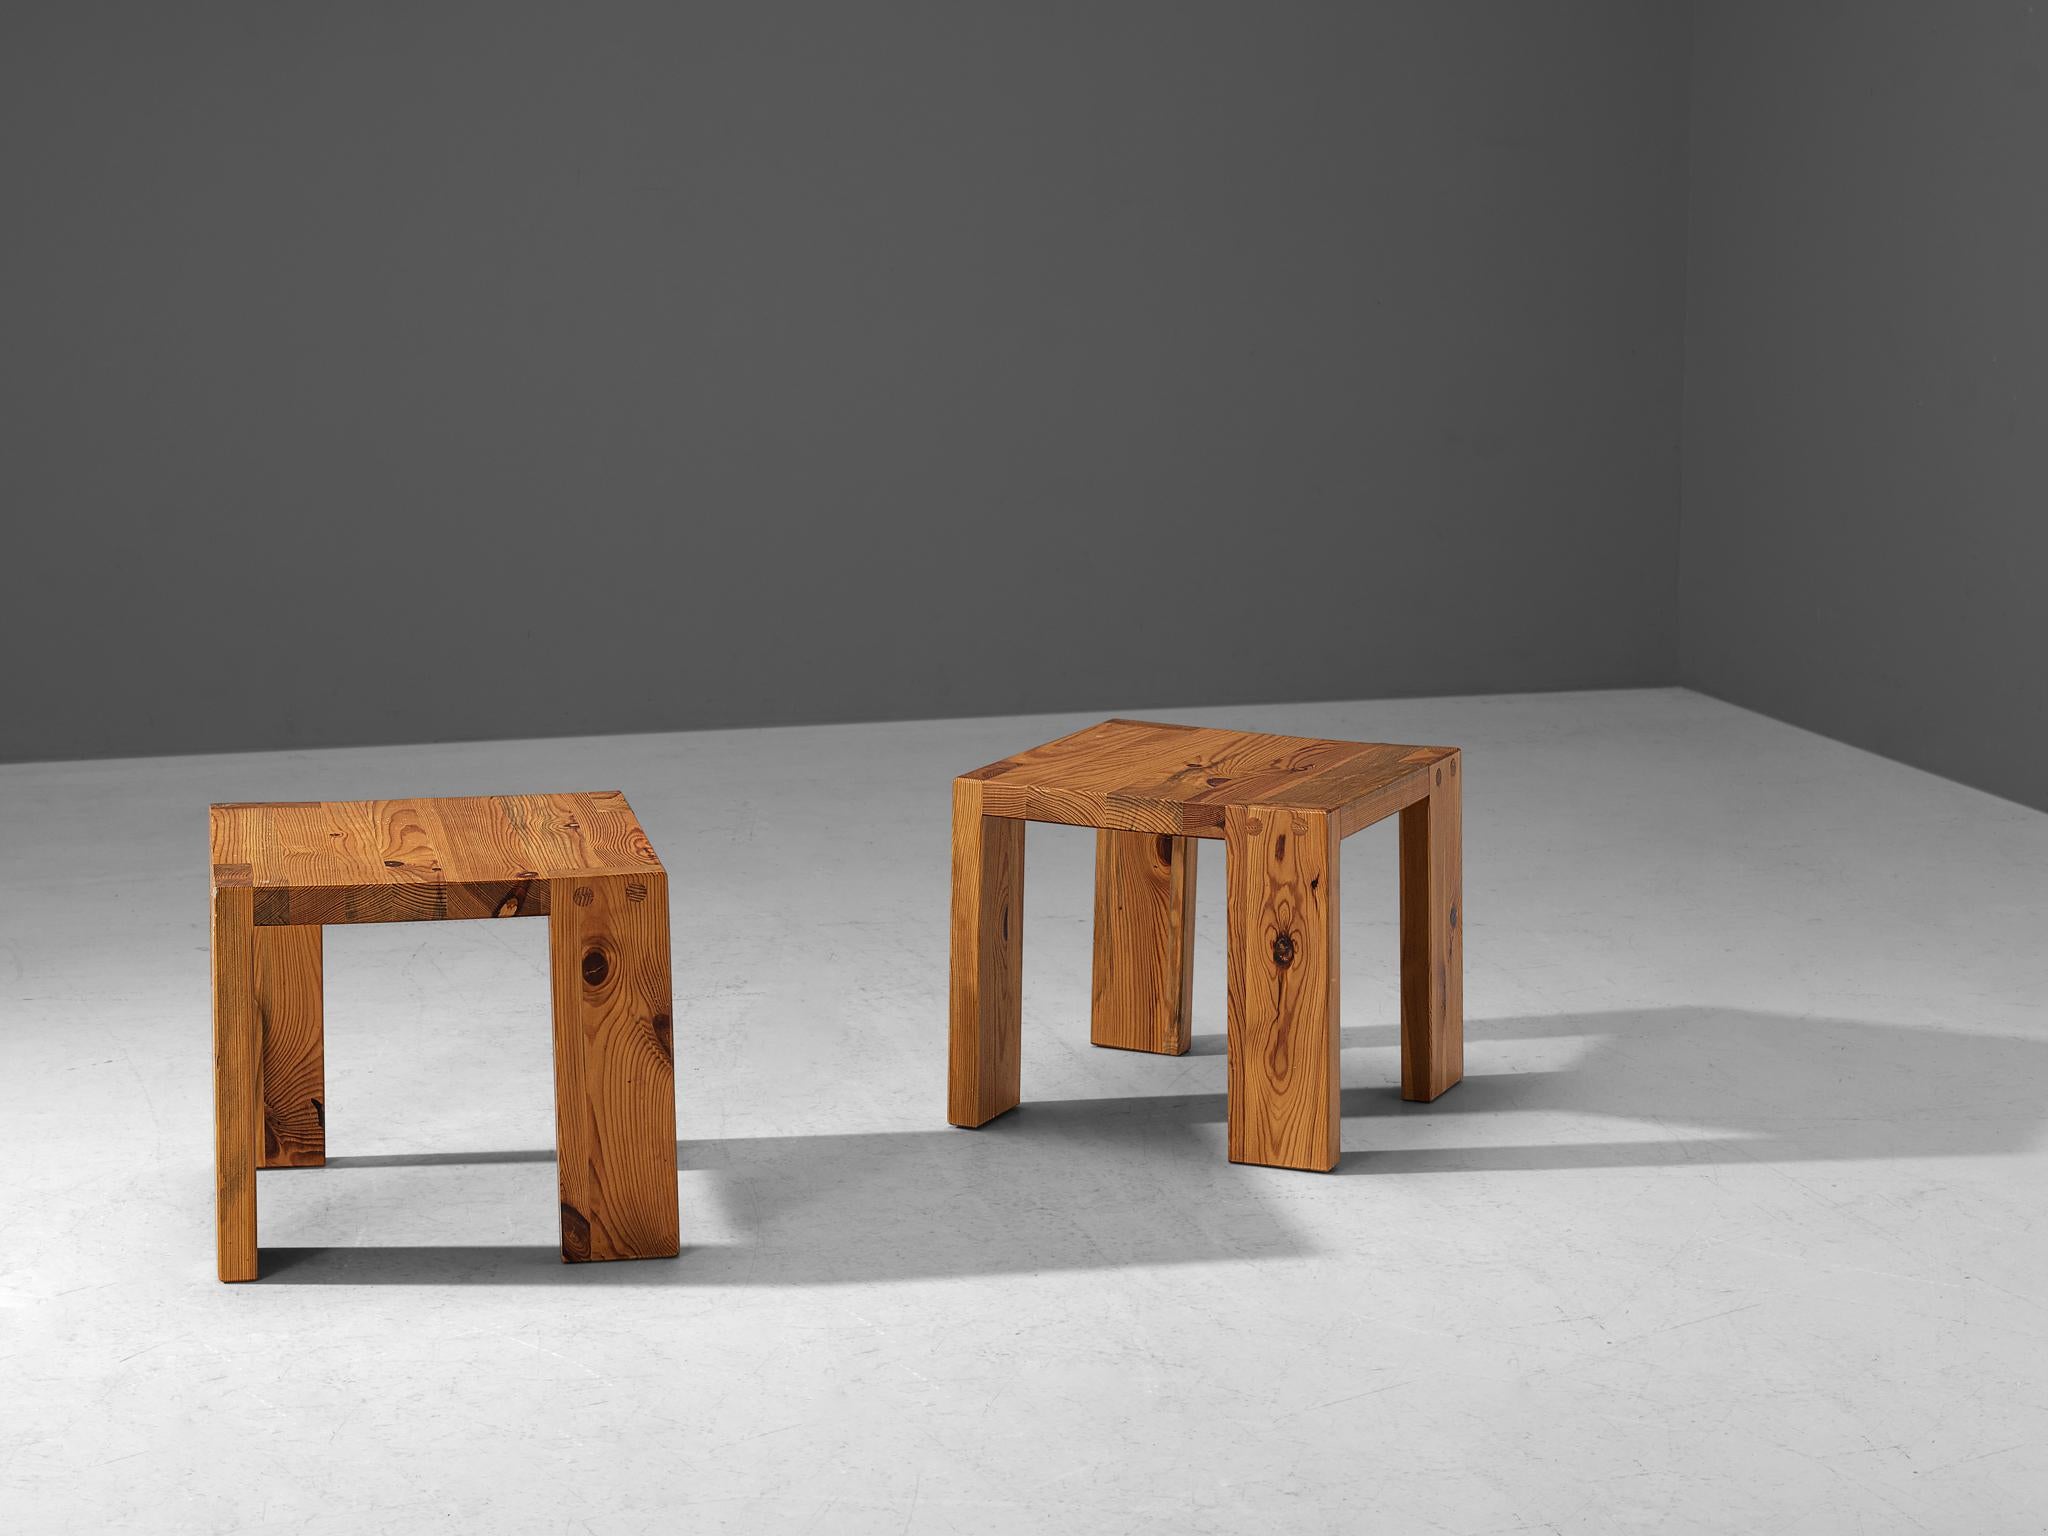 Sven Larsson, side tables, pine, Sweden, 1970s.

Pair of side tables designed by Swedish designer Sven Larsson. Distinctive for his work is the use of solid pine wood and the refined joinery that shows his true craftsmanship. Especially the double